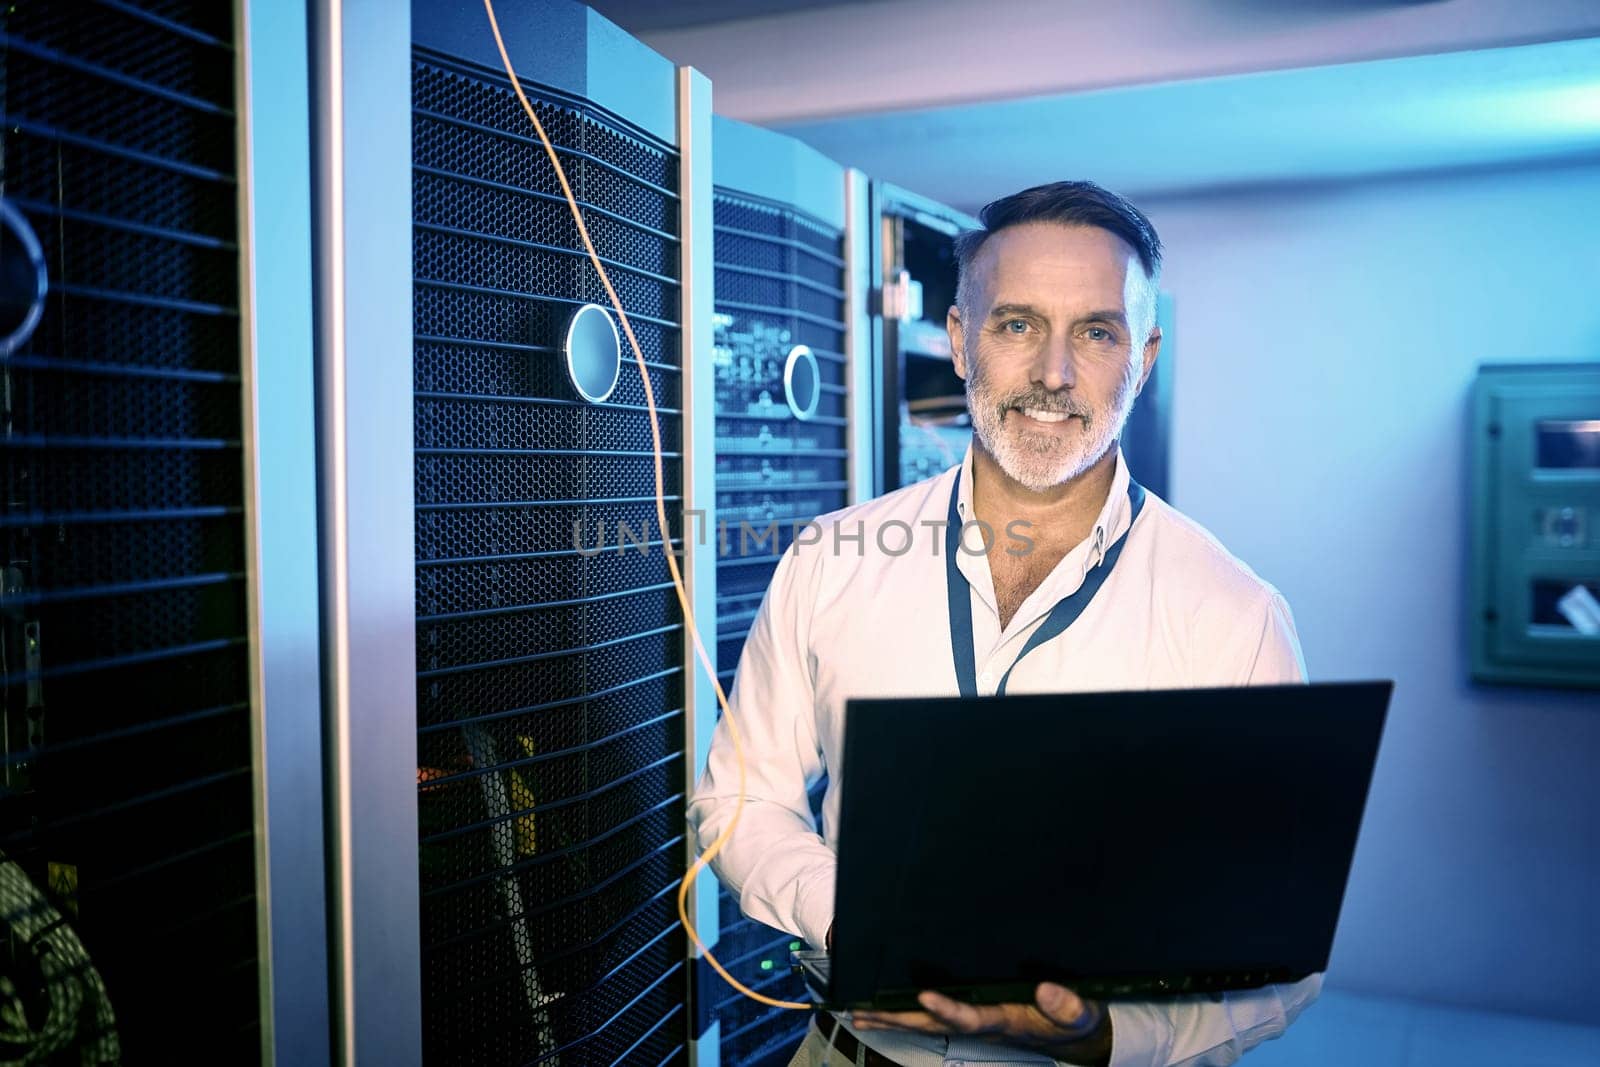 It might seem complex, but its simple to me. Portrait of a mature man using a laptop while working in a server room